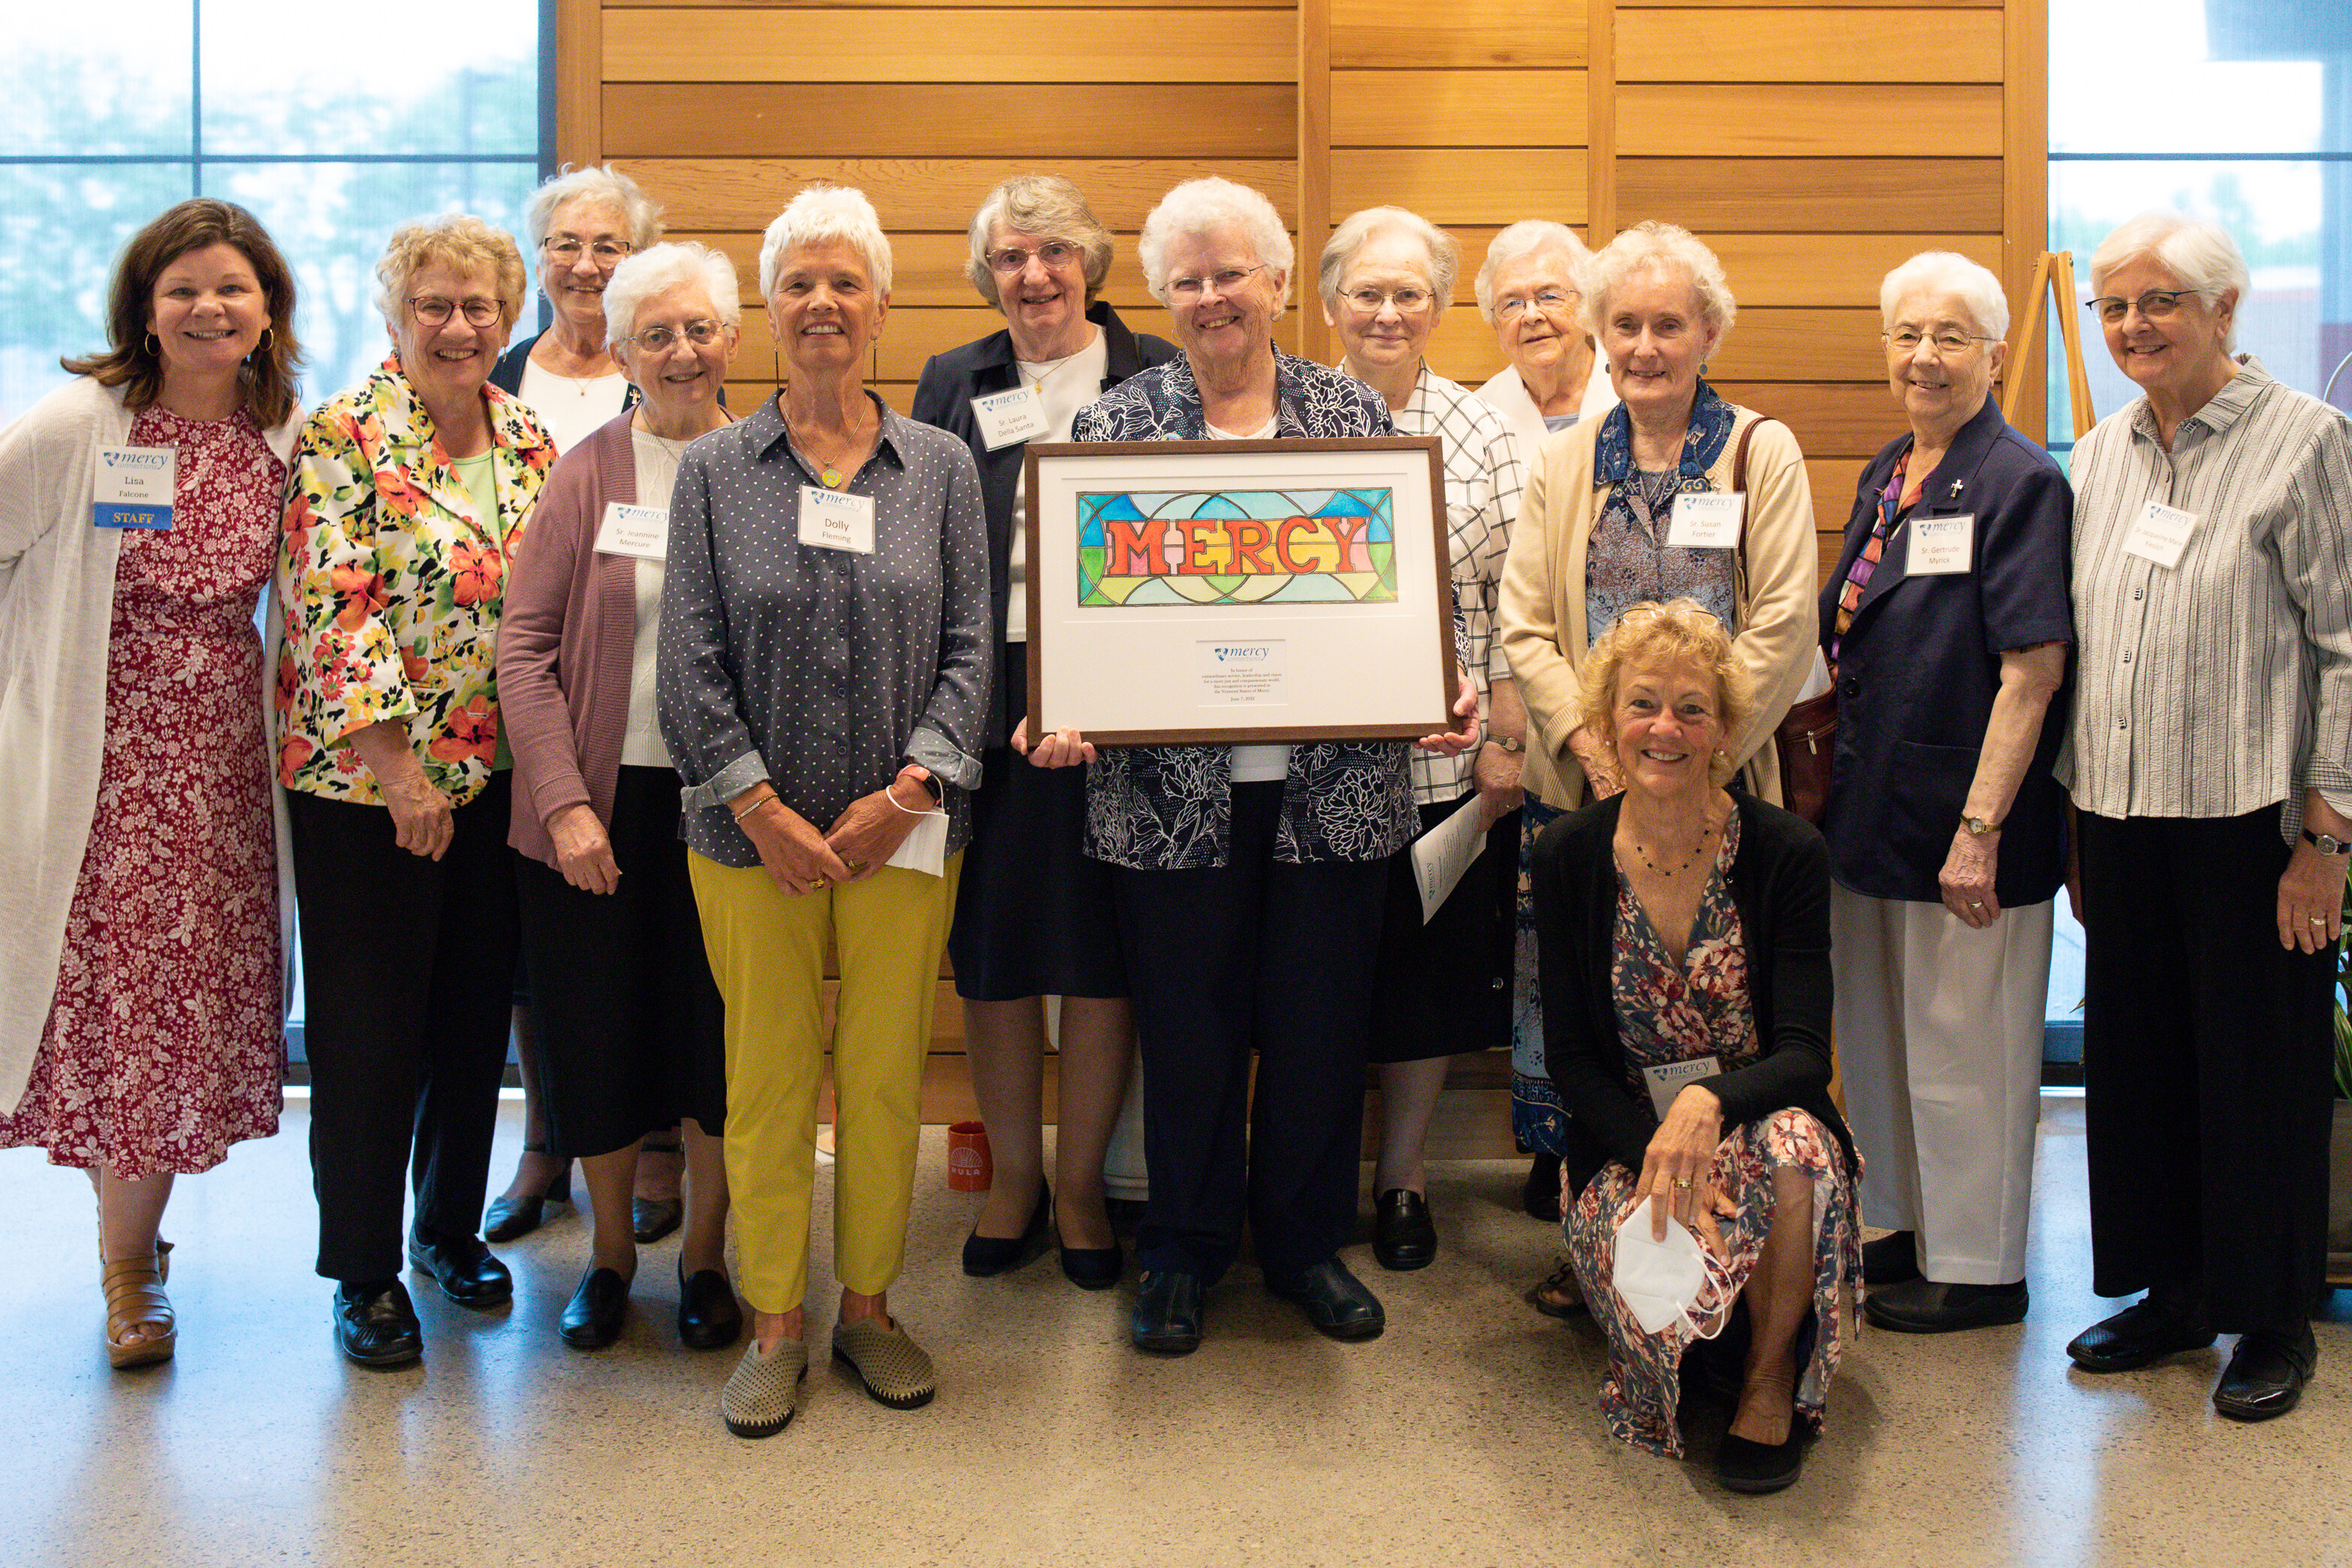 A large group of women, the Vermont Sisters of Mercy, with a framed painting of the word 